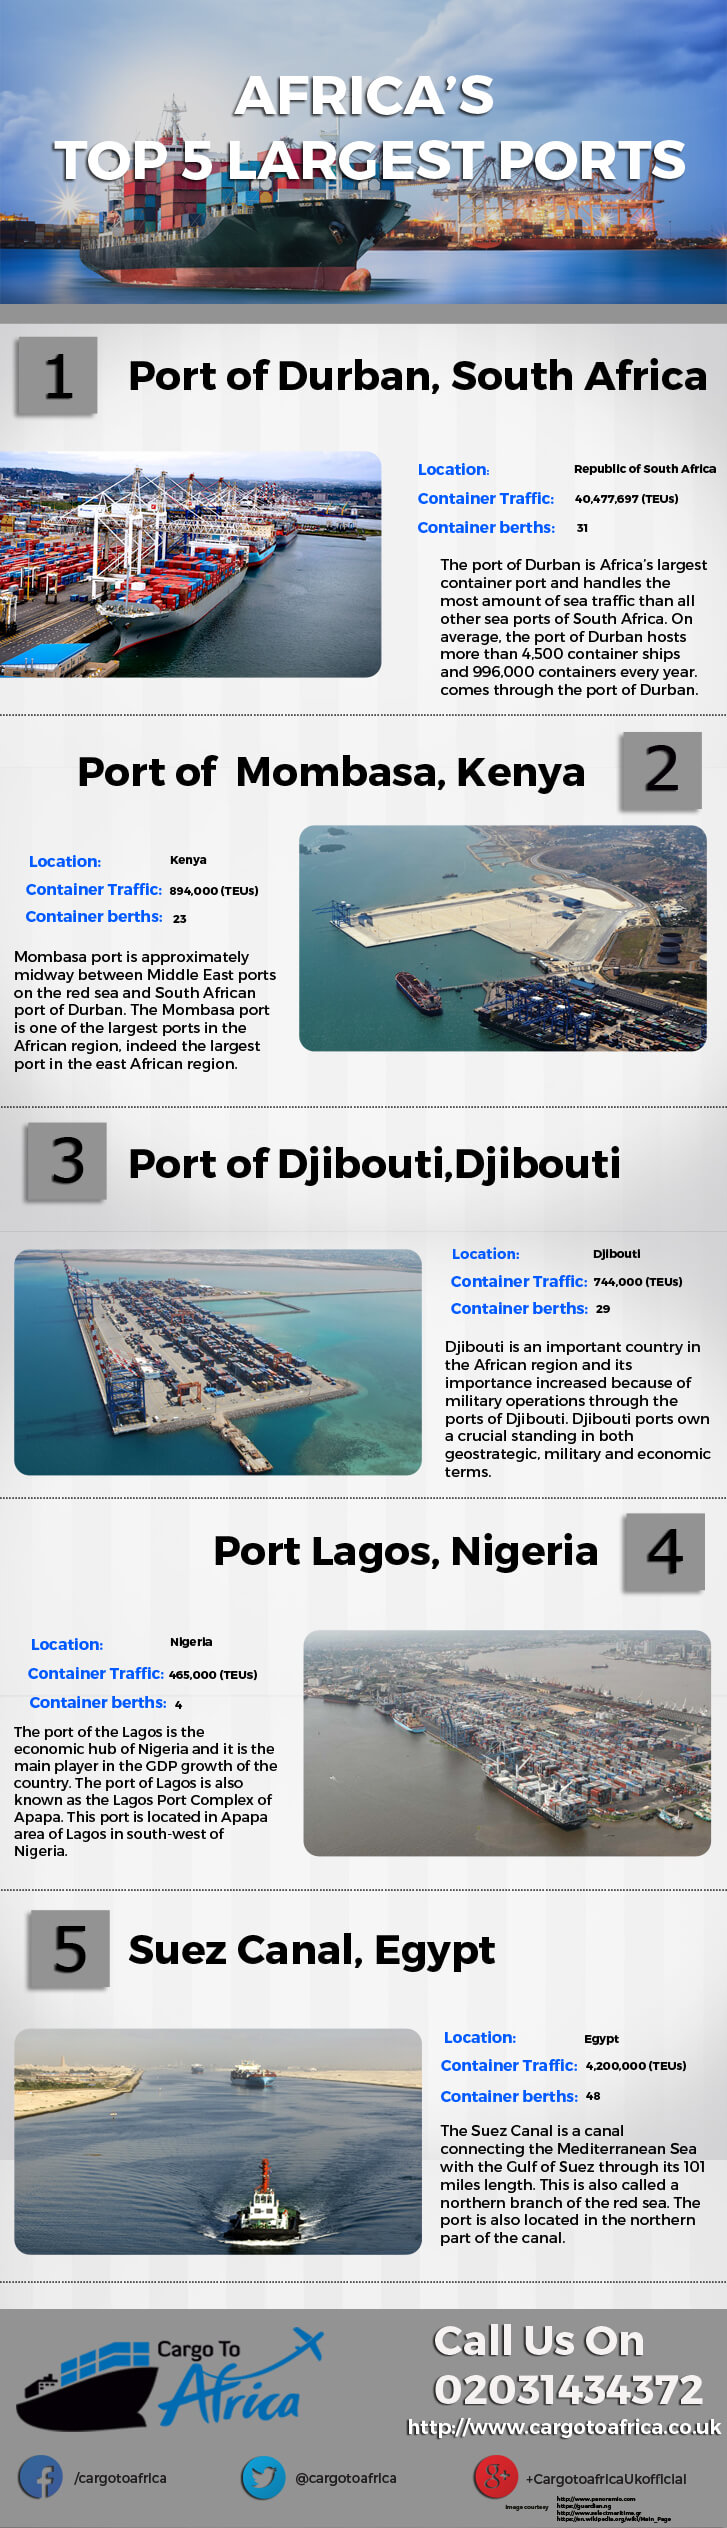 Africa’s Top 5 Largest Ports